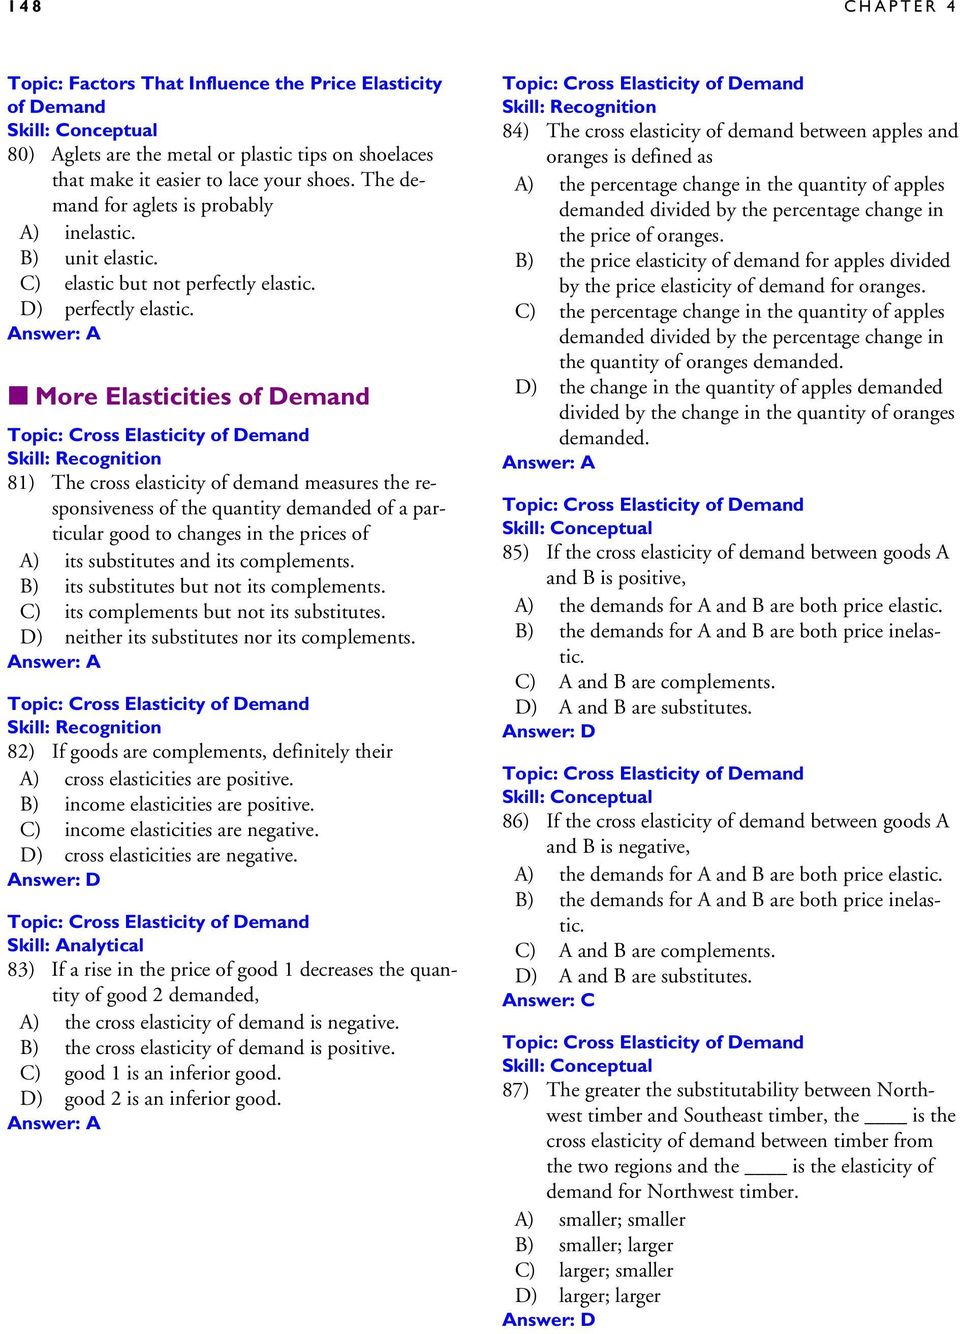 More Elasticities of Demand 81) The cross elasticity of demand measures the responsiveness of the quantity demanded of a particular good to changes in the prices of A) its substitutes and its